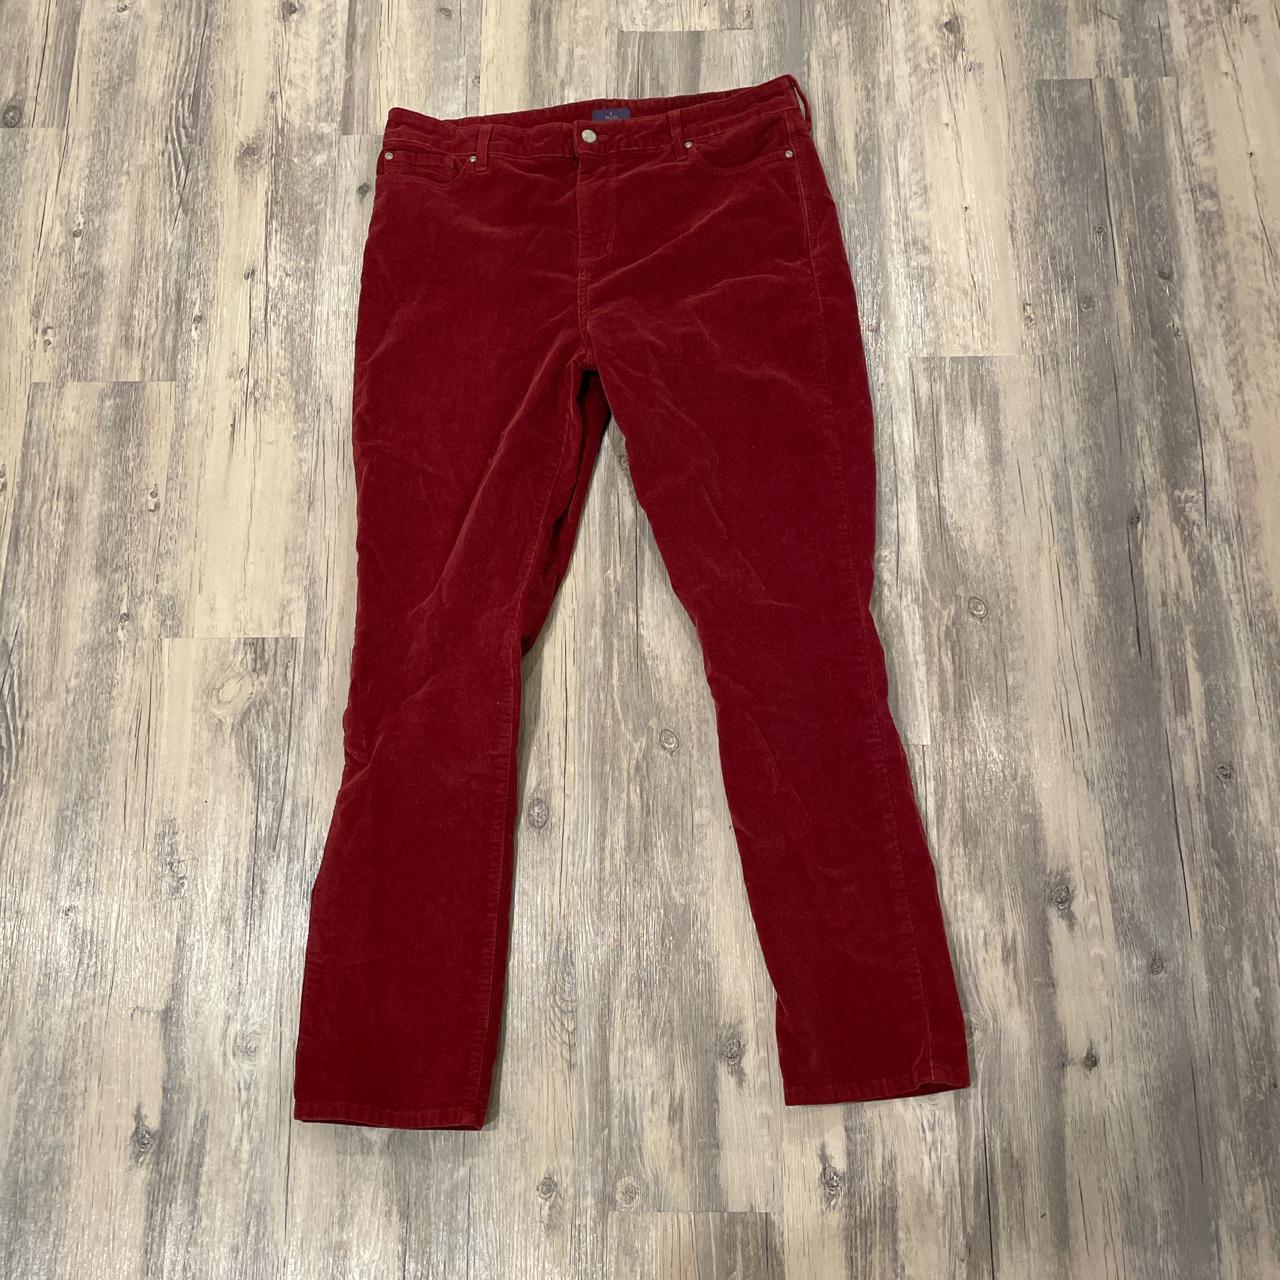 Product Image 1 - Red Corduroy pants
Size : 16